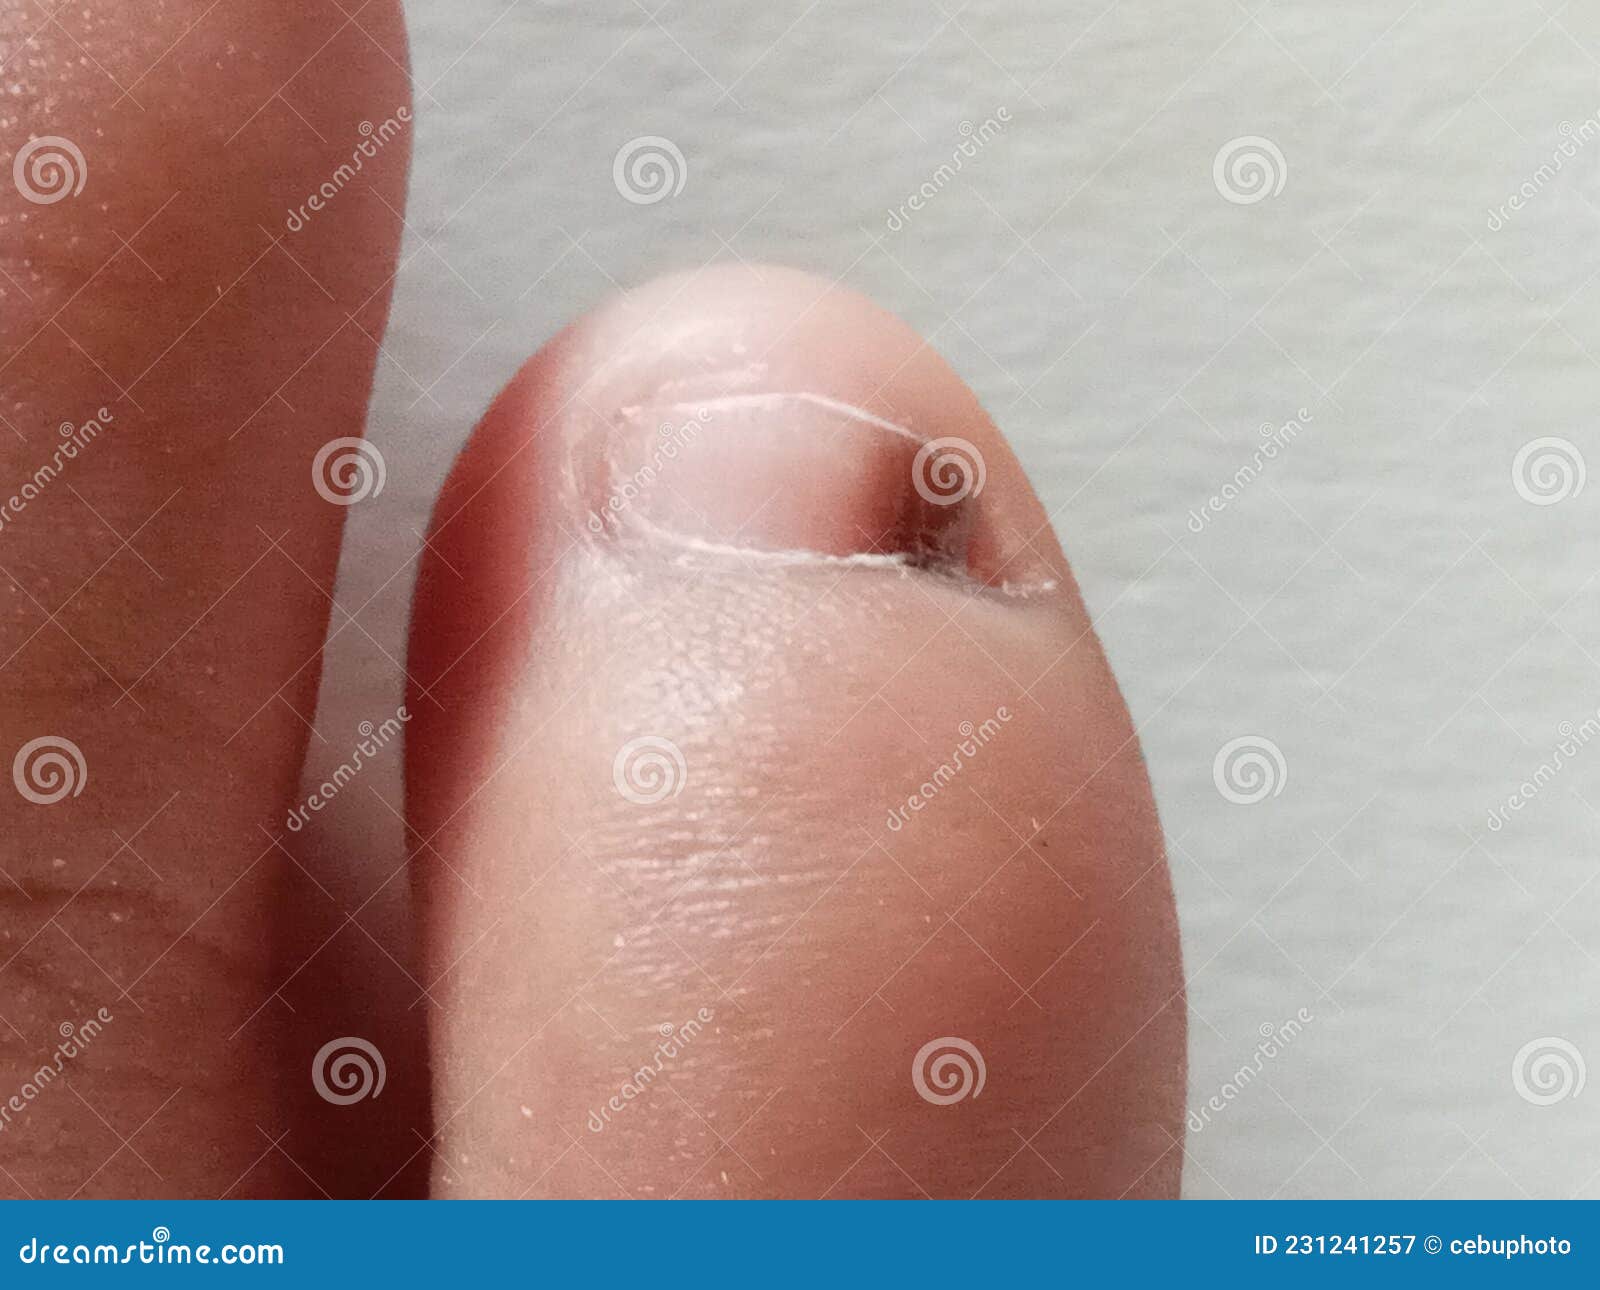 Brown spots on nails | Mumsnet